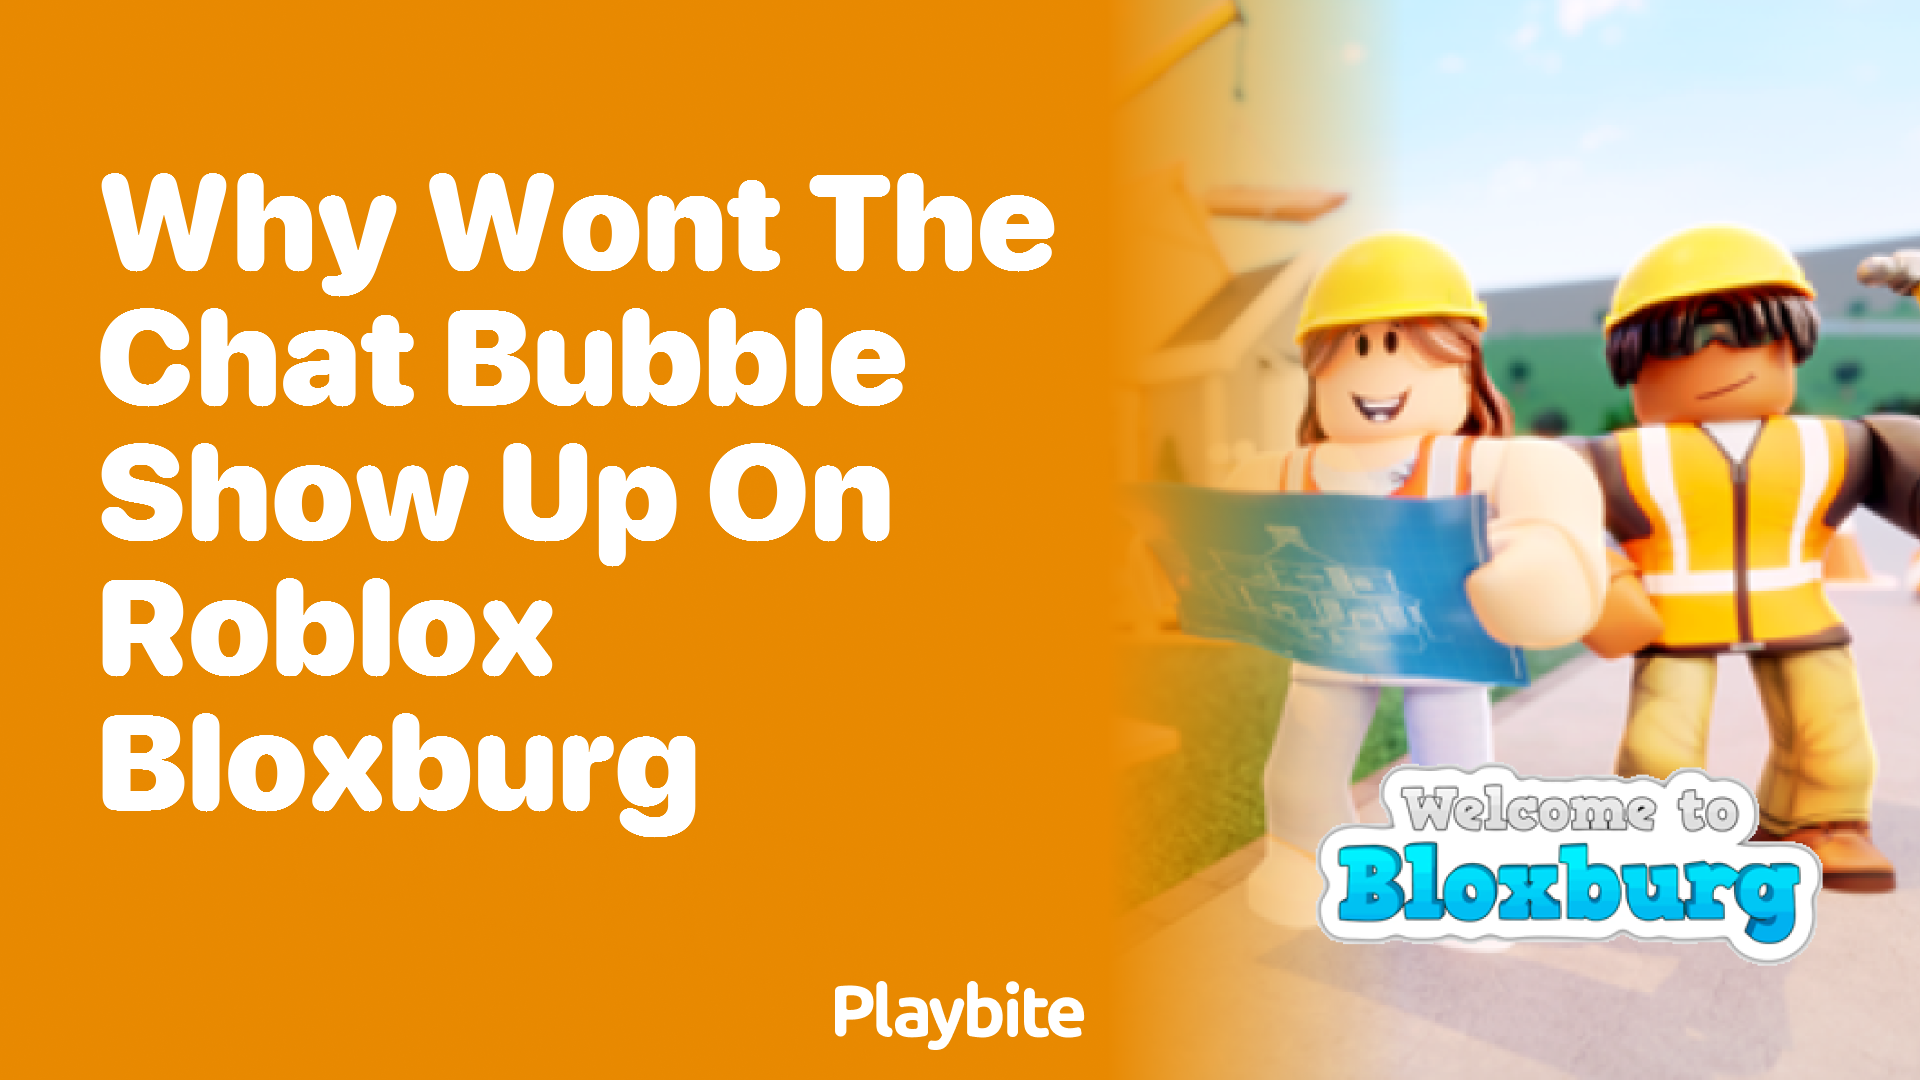 Why Won&#8217;t the Chat Bubble Show Up on Roblox Bloxburg?